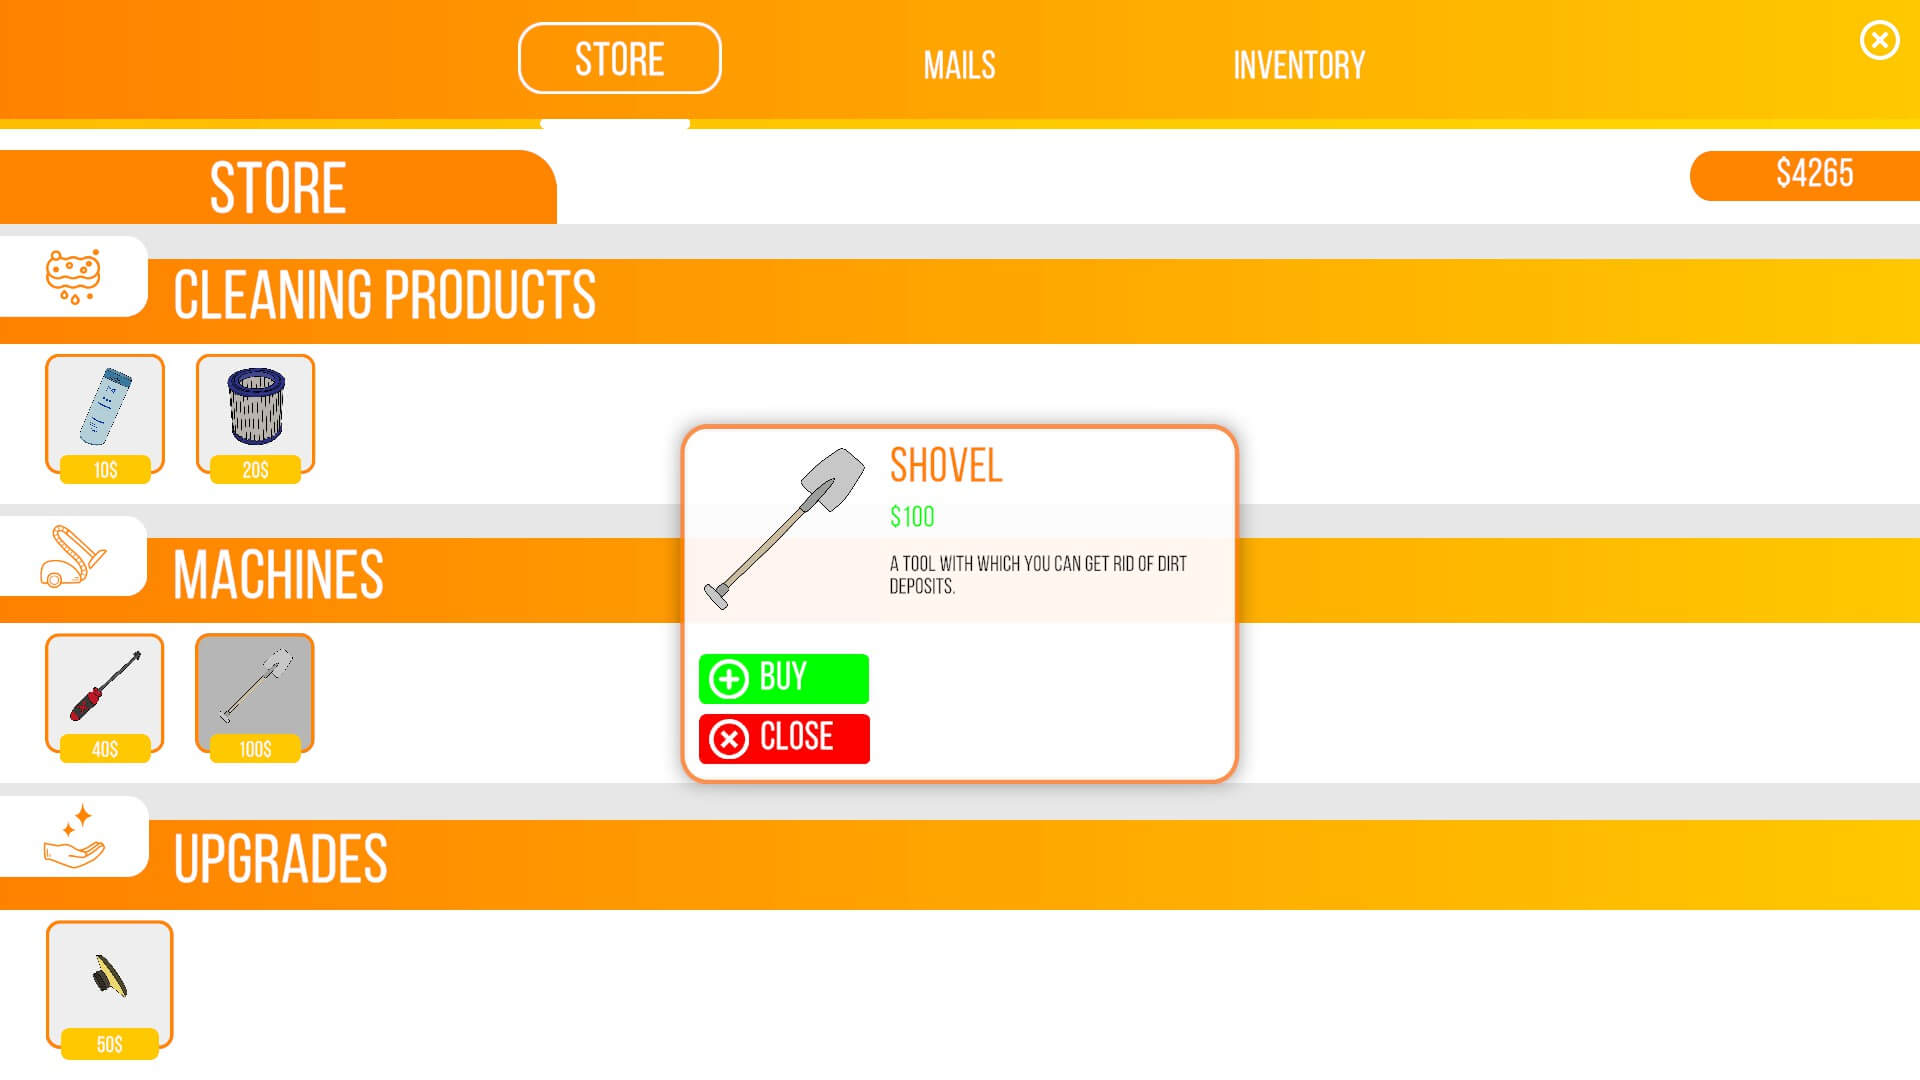 The store page found in the game. Players can select from Cleaning Products, Machines, and Upgrades. Once the player has selected which on they want a smaller box appears for conformation. the Site seems to be mainly orange and white.